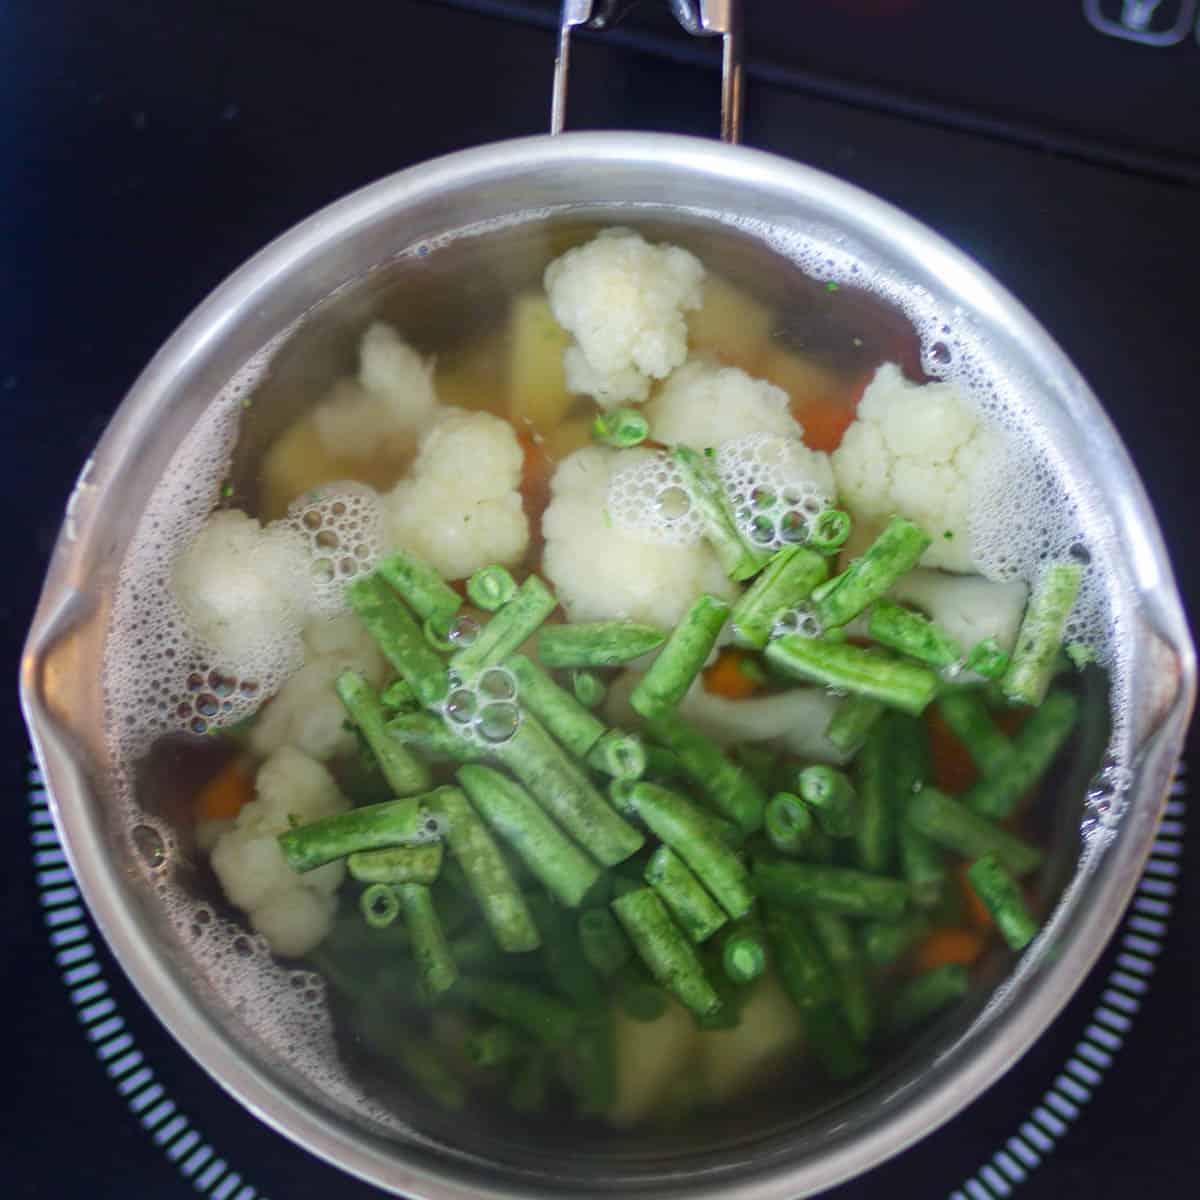 Add veggies in water and boil them. 